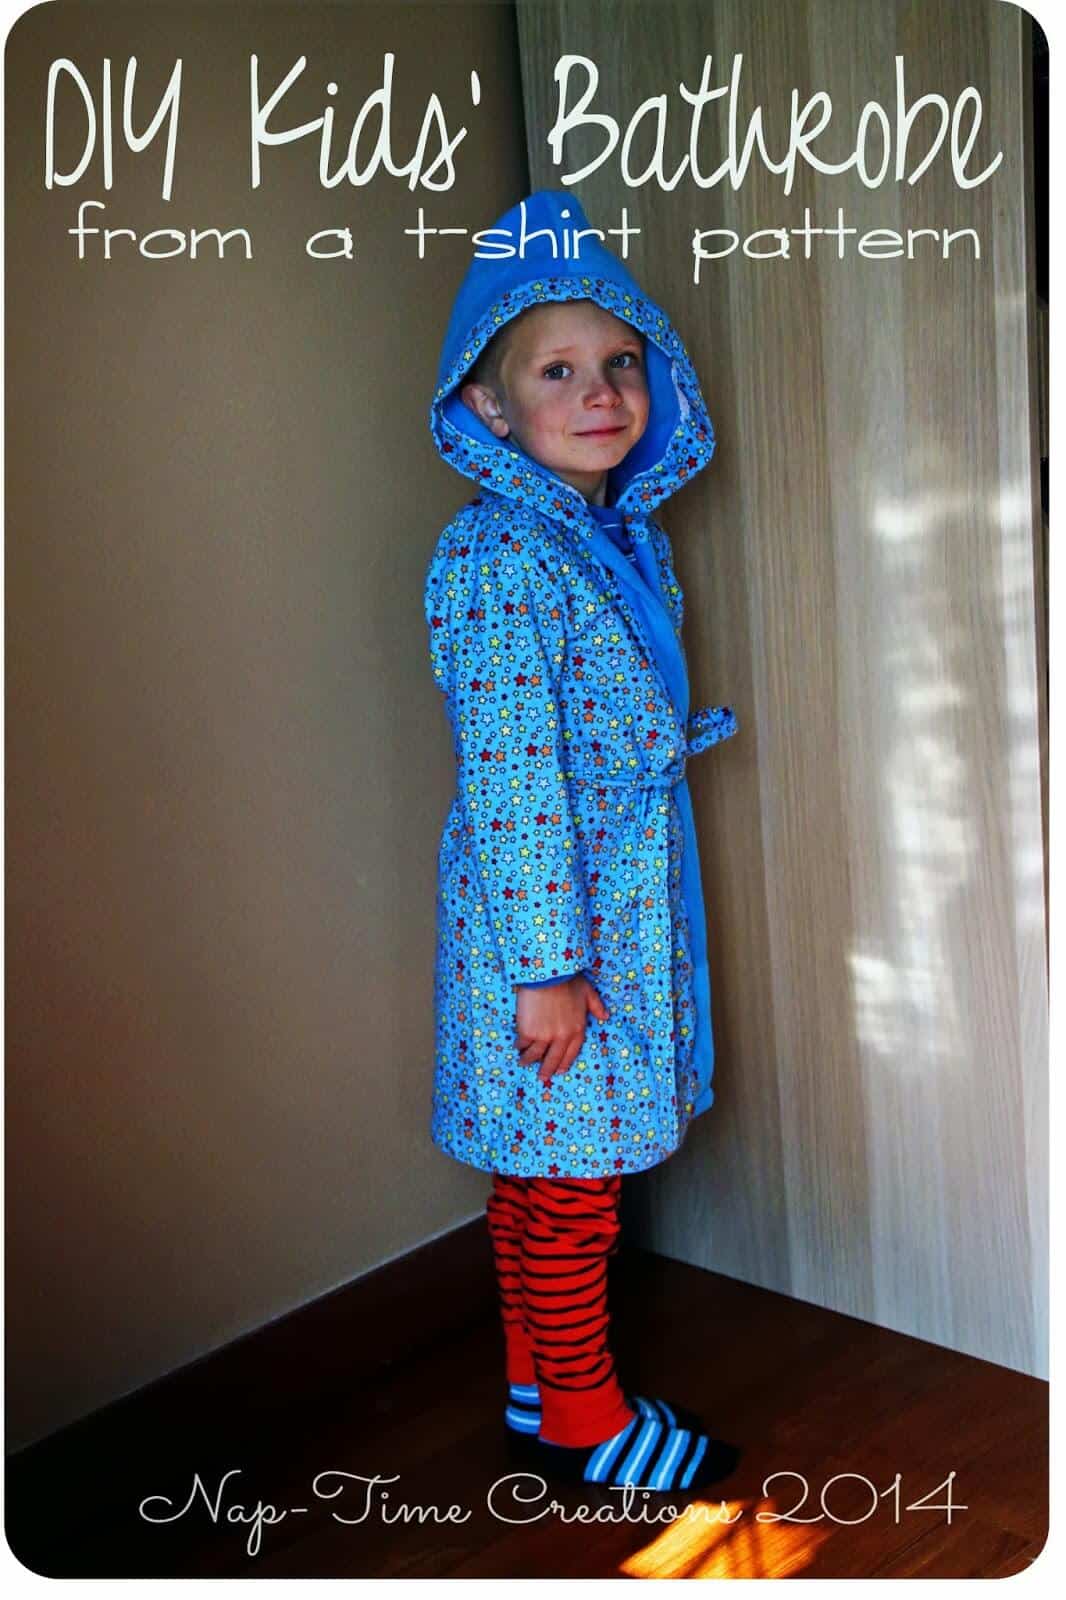 Kid’s bath robe made from a t-shirt pattern